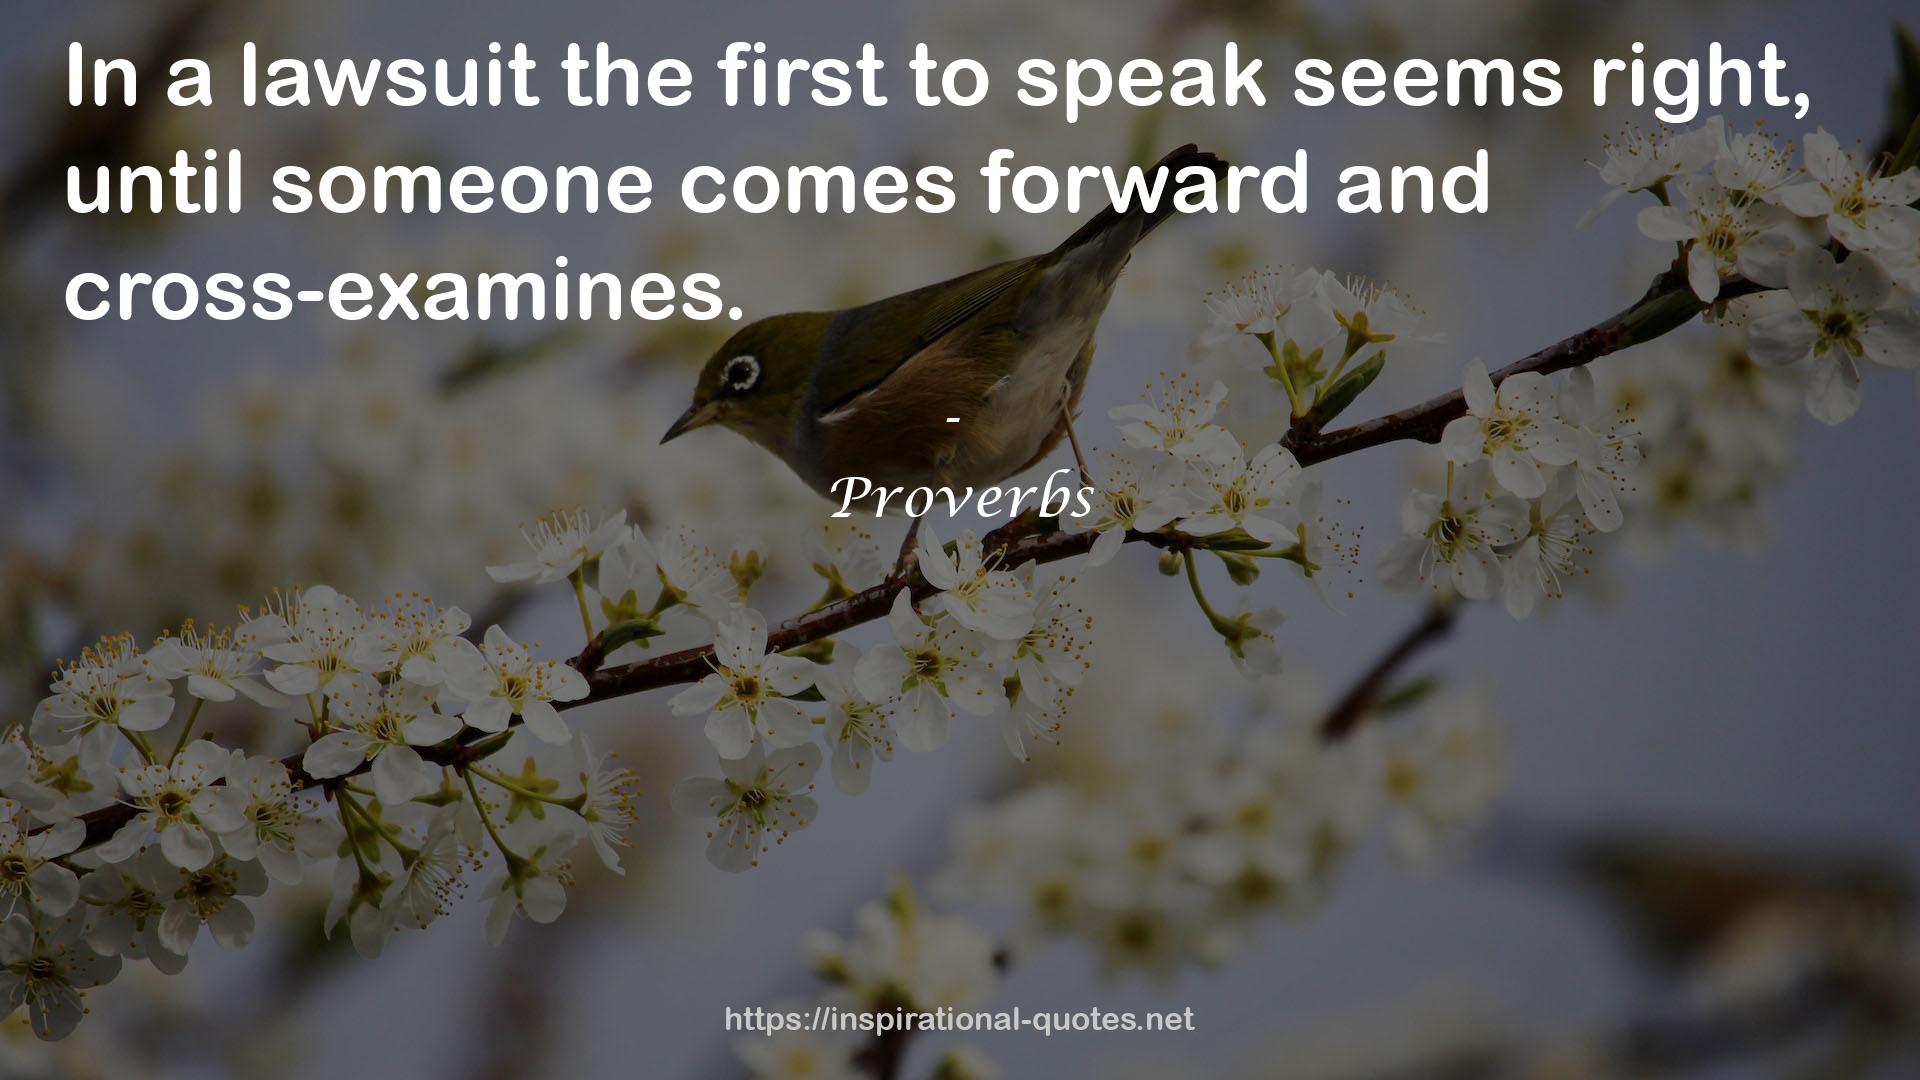 Proverbs QUOTES